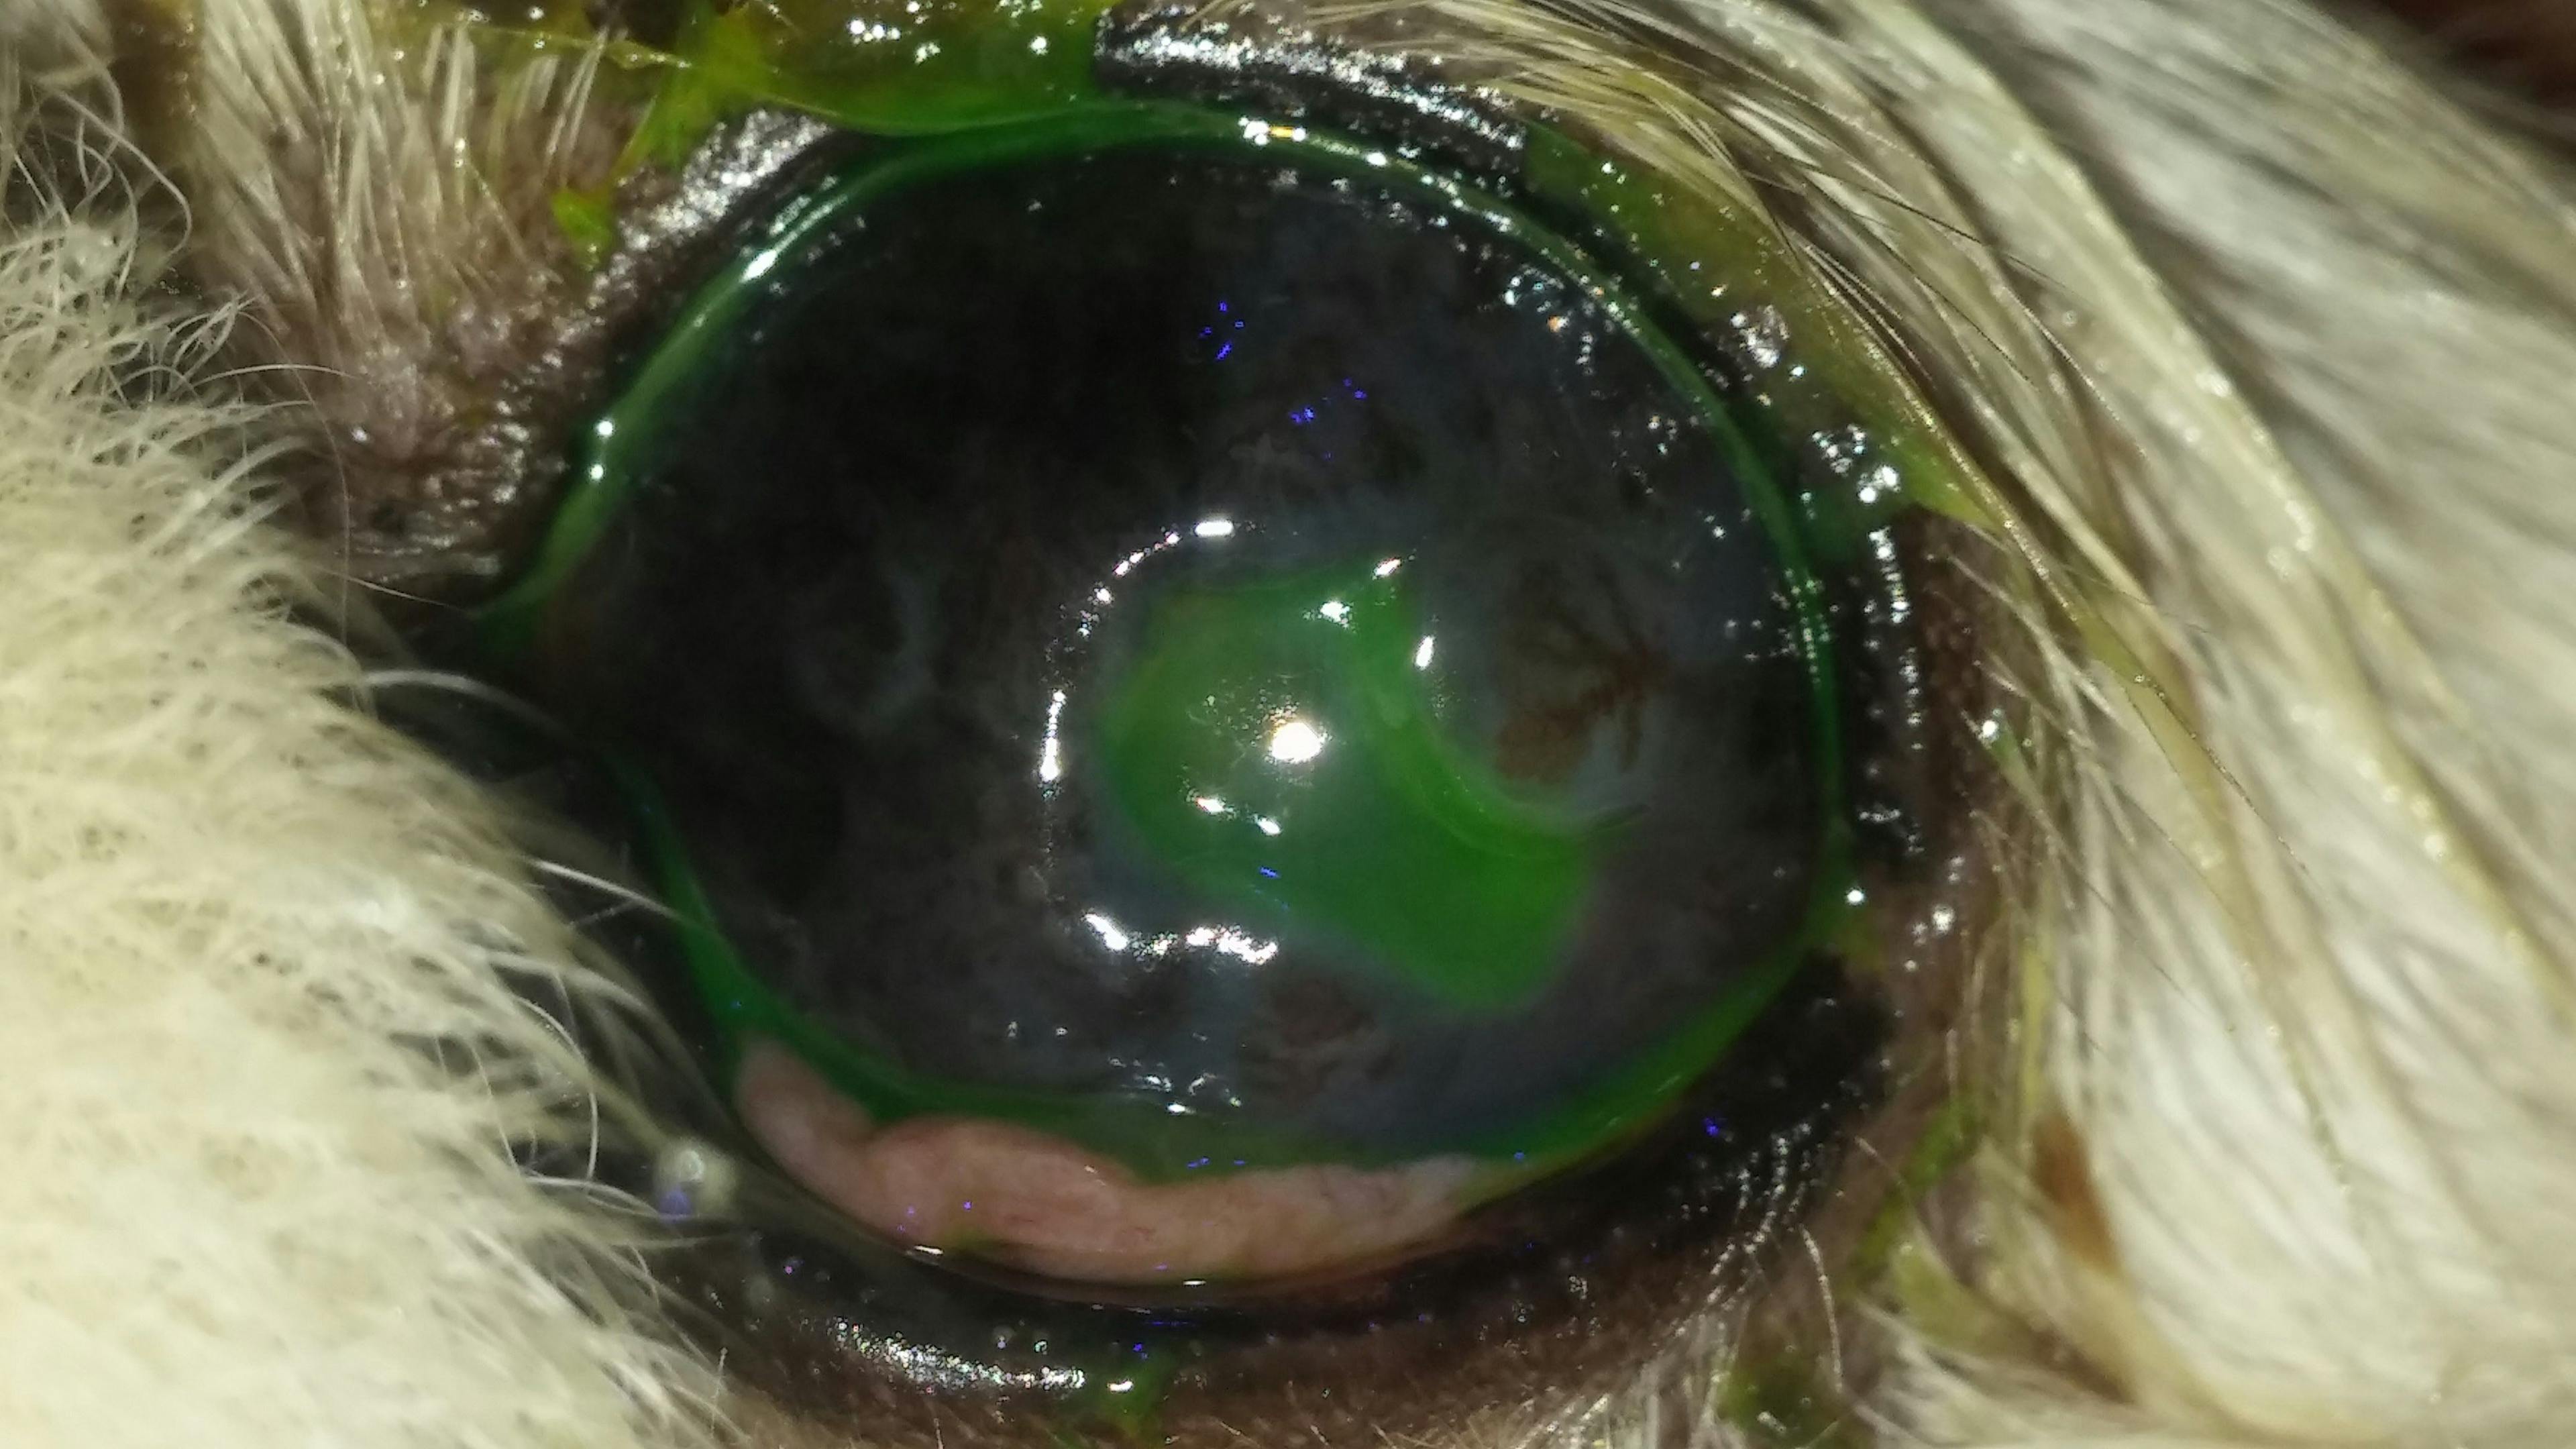 Figure 4. A corneal ulcer (stained by fluorescein) secondary to KCS. Note the extensive pigmentation of the cornea and its lackluster appearance, based on the dull reflection of the camera flash.